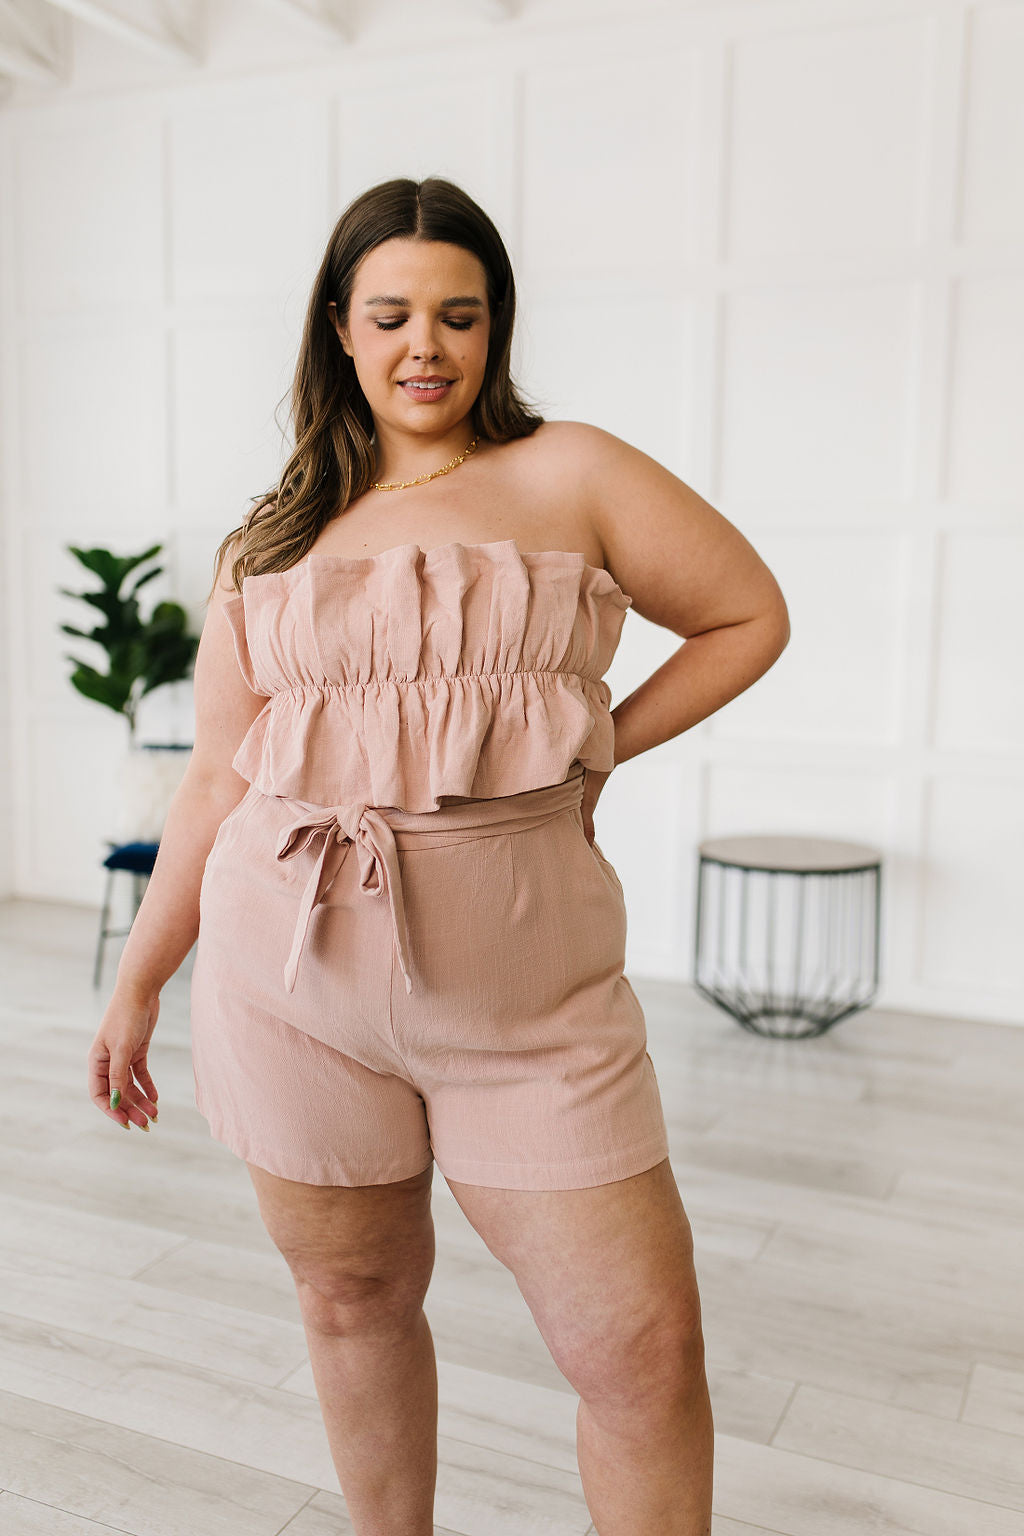 Let the Pink Skies Romper take you from day to night in style! This amazing strapless piece has adorable details like the ruffle pleated bust, tie waist, side pockets and shorts! Pair this with heels and a blazer for a daytime look then strip the blazer for date night! S - 3X